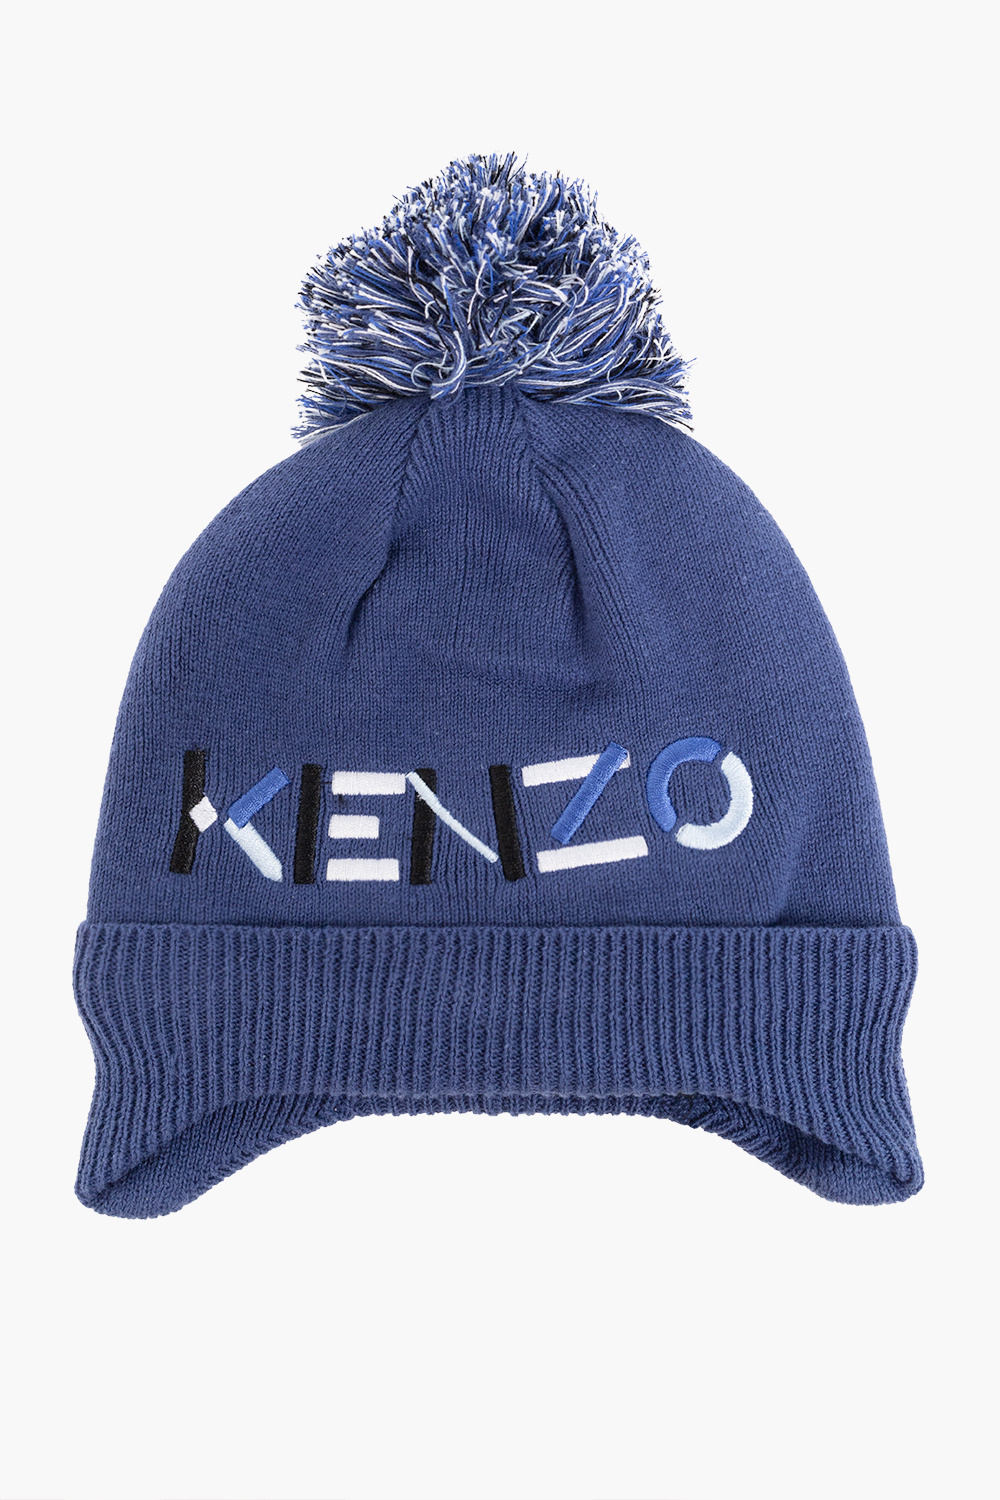 Kenzo Kids The collection also includes printed bucket hats